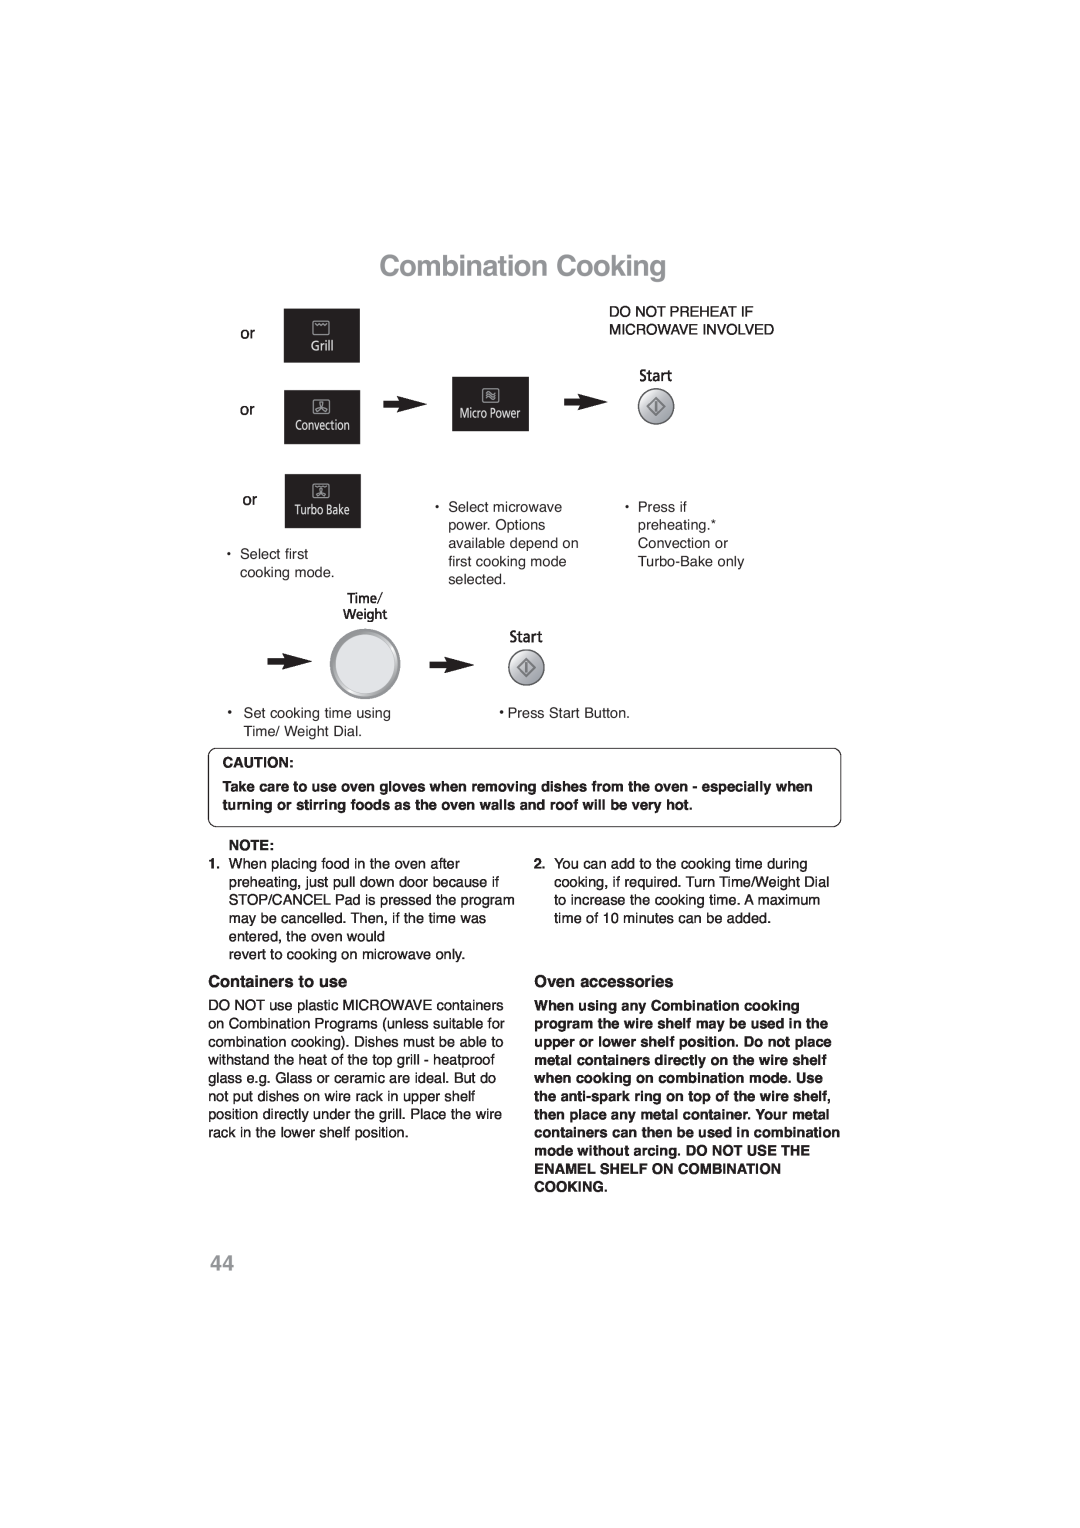 Panasonic NN-CF768M, NN-CF778S operating instructions Combination Cooking, Containers to use, Oven accessories 